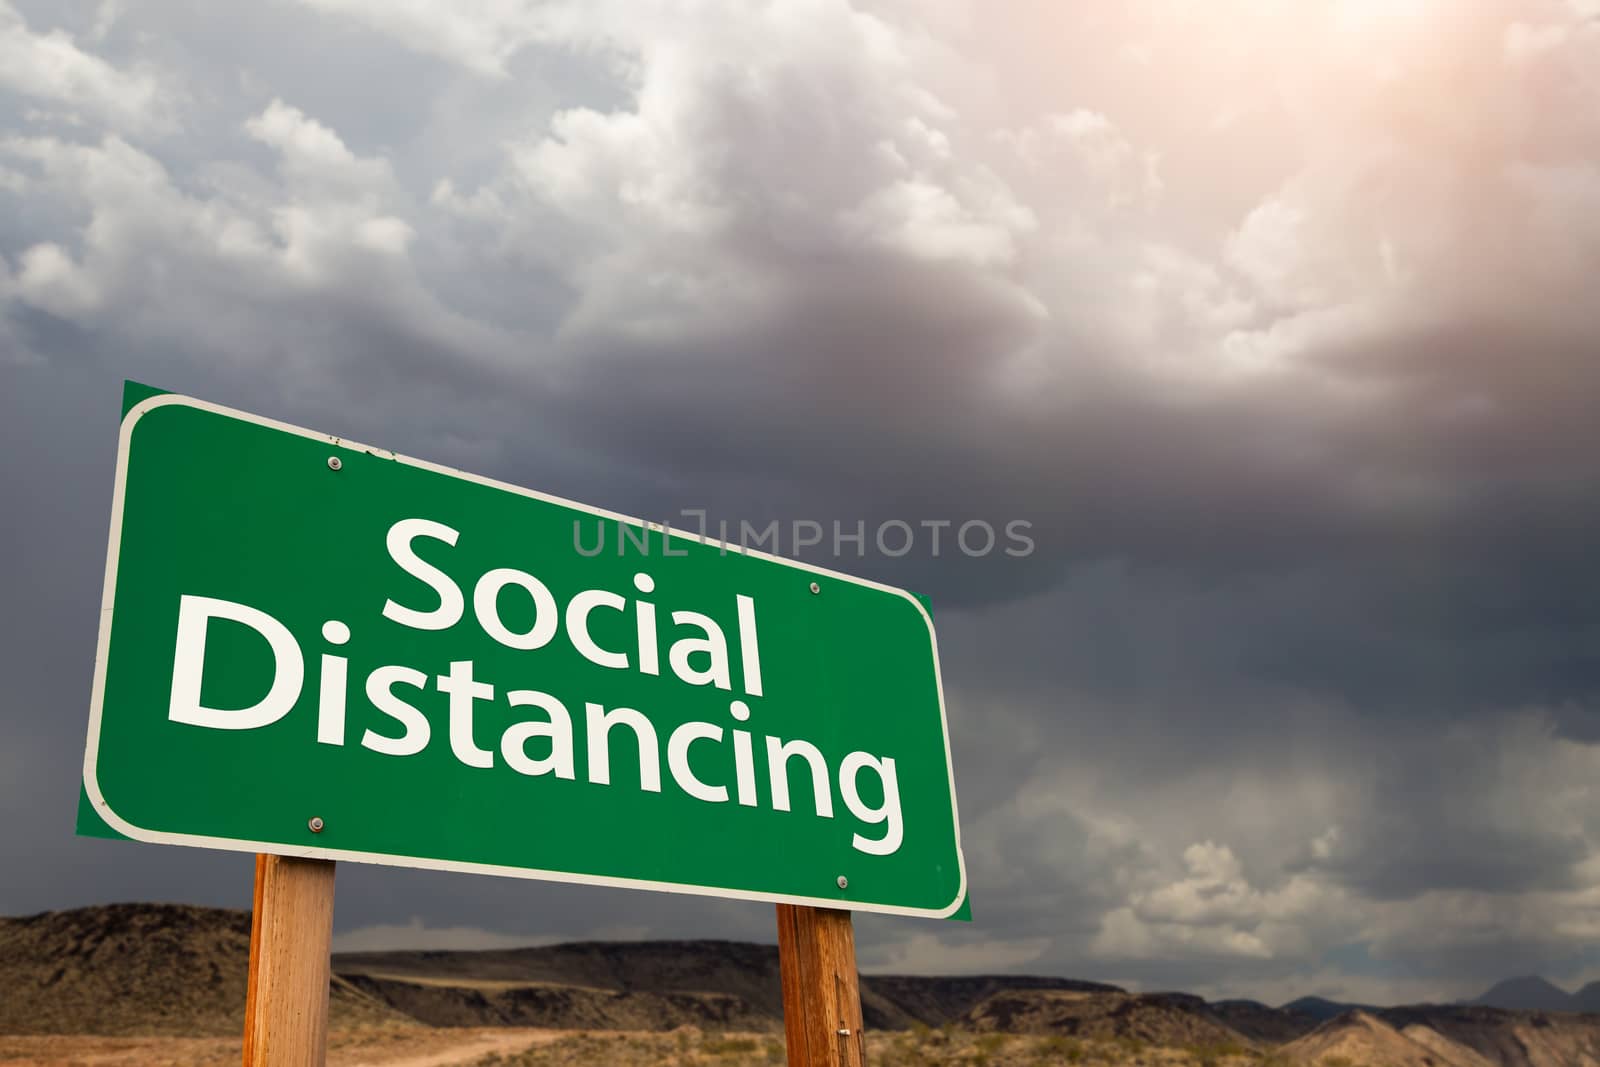 Social Distancing Green Road Sign Against Ominous Stormy Cloudy  by Feverpitched